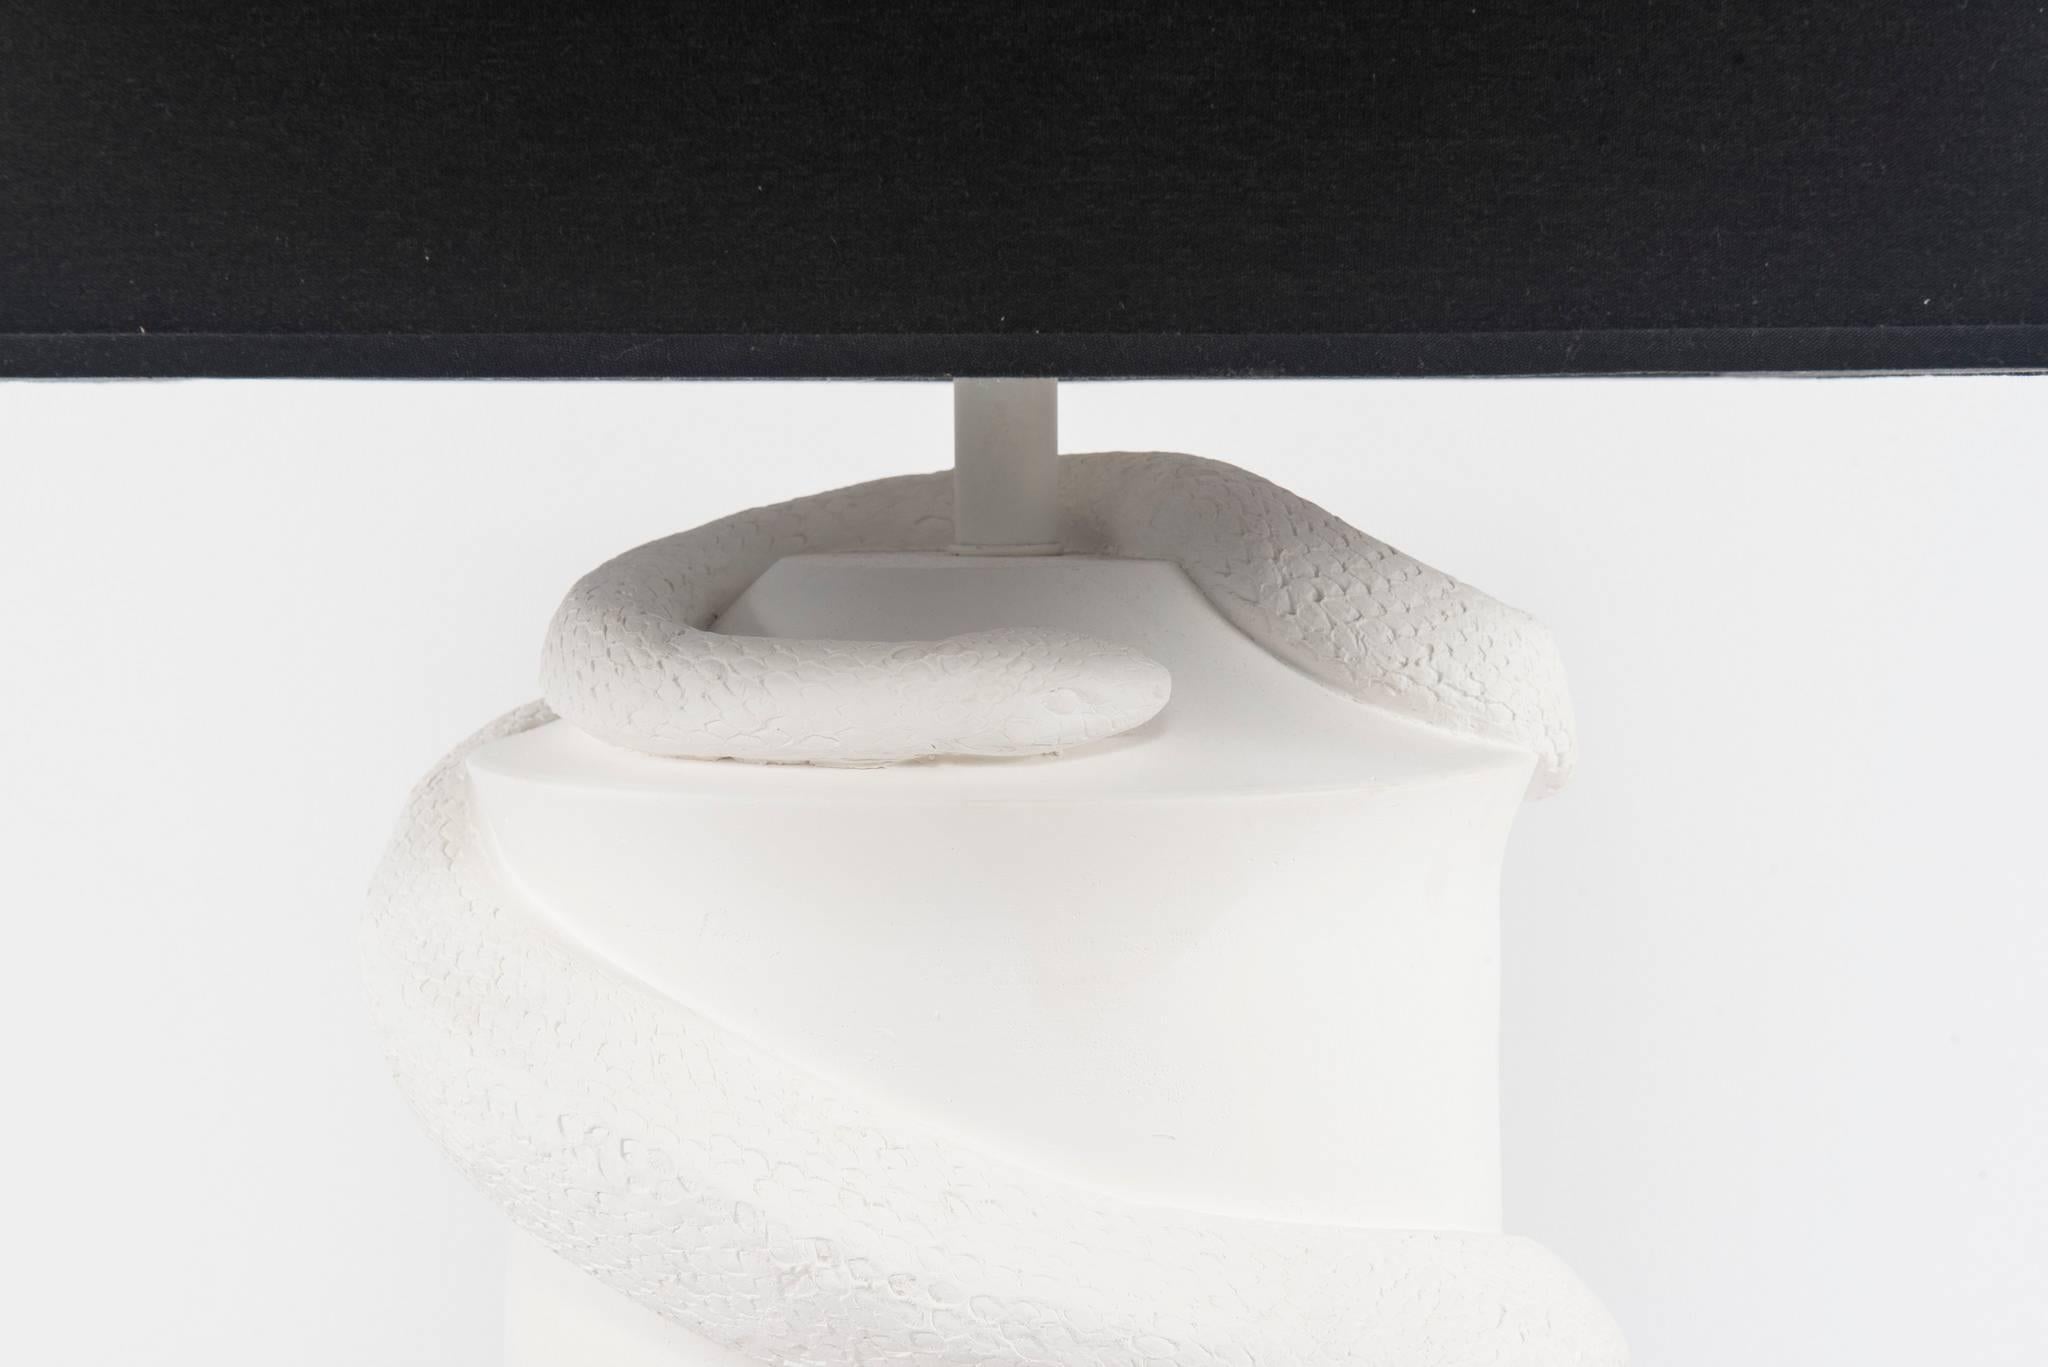 A monumental white bisque serpent lamp with black paper shade.

Shade is 18 inches x 18 inches
Lamp dimensions to the bottom of the socket 26.75 inches high.